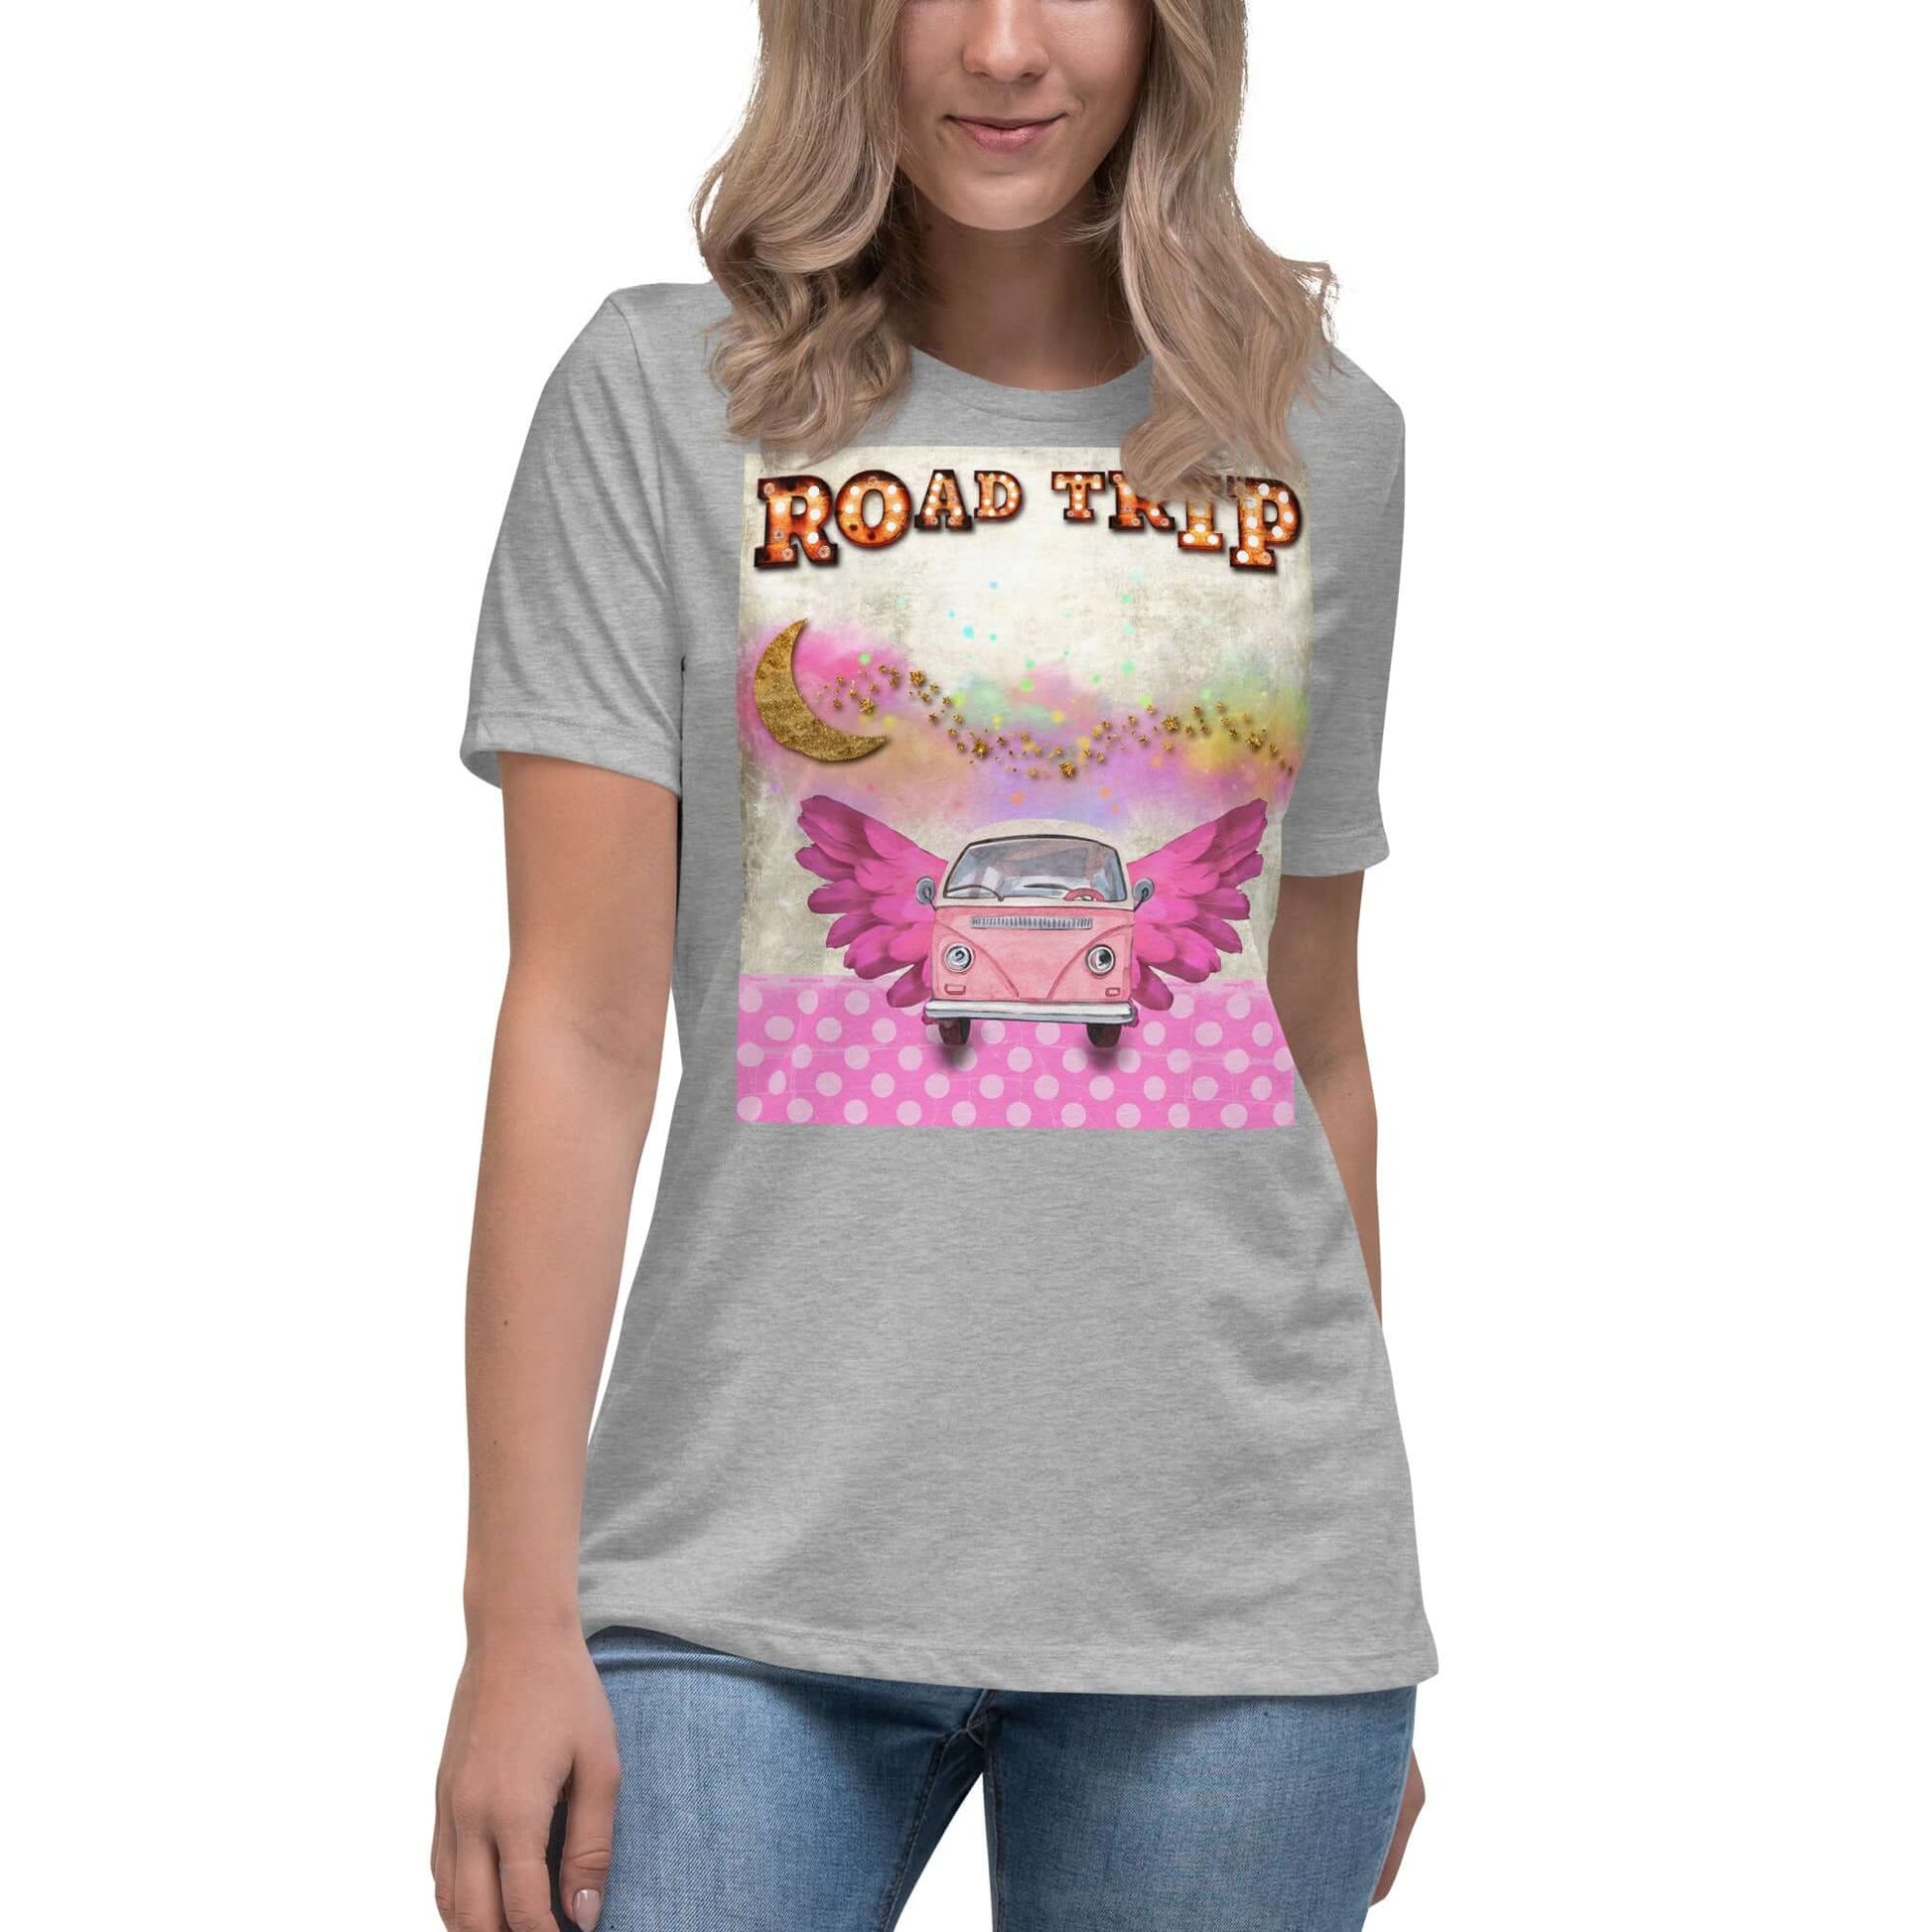 Pink Camper Van in Rainbow Clouds with Moon and Stars “Road Trip” Women’s Short Sleeve Tee in Athletic Heather Gray 